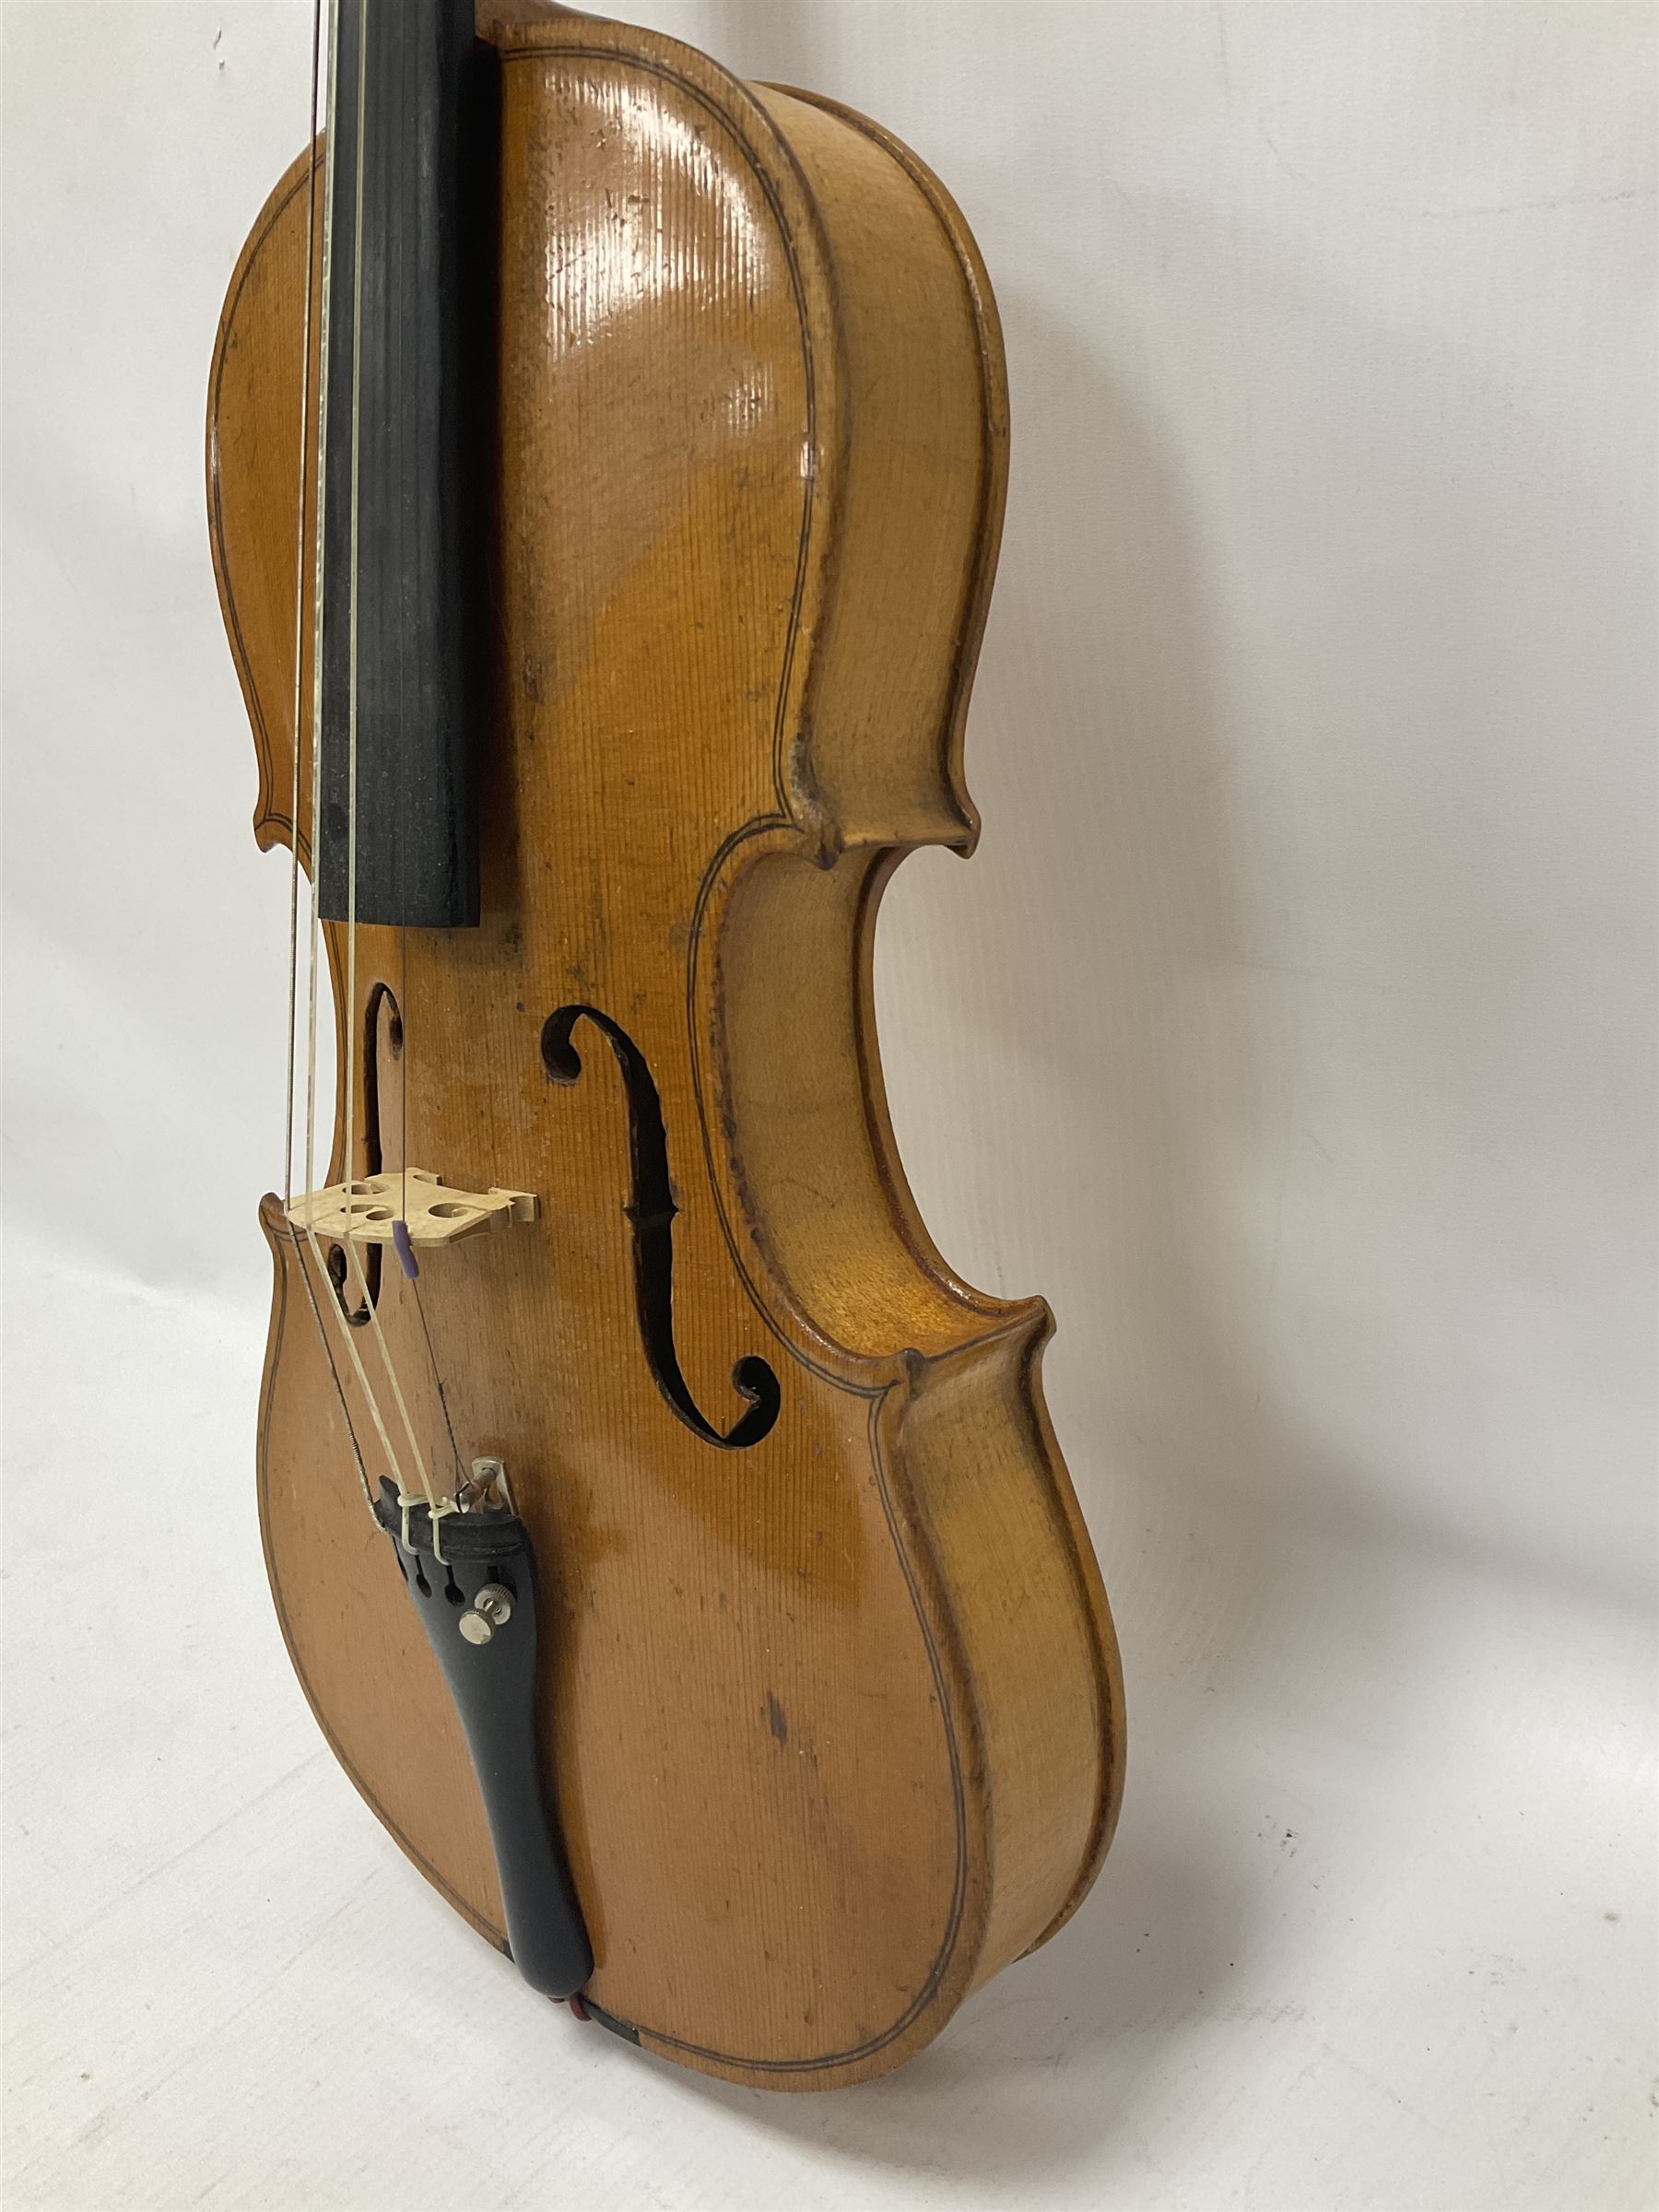 19th century 3/4 size violin in its original fitted wooden “coffin case” Overall length 53cm No bow - Image 8 of 16